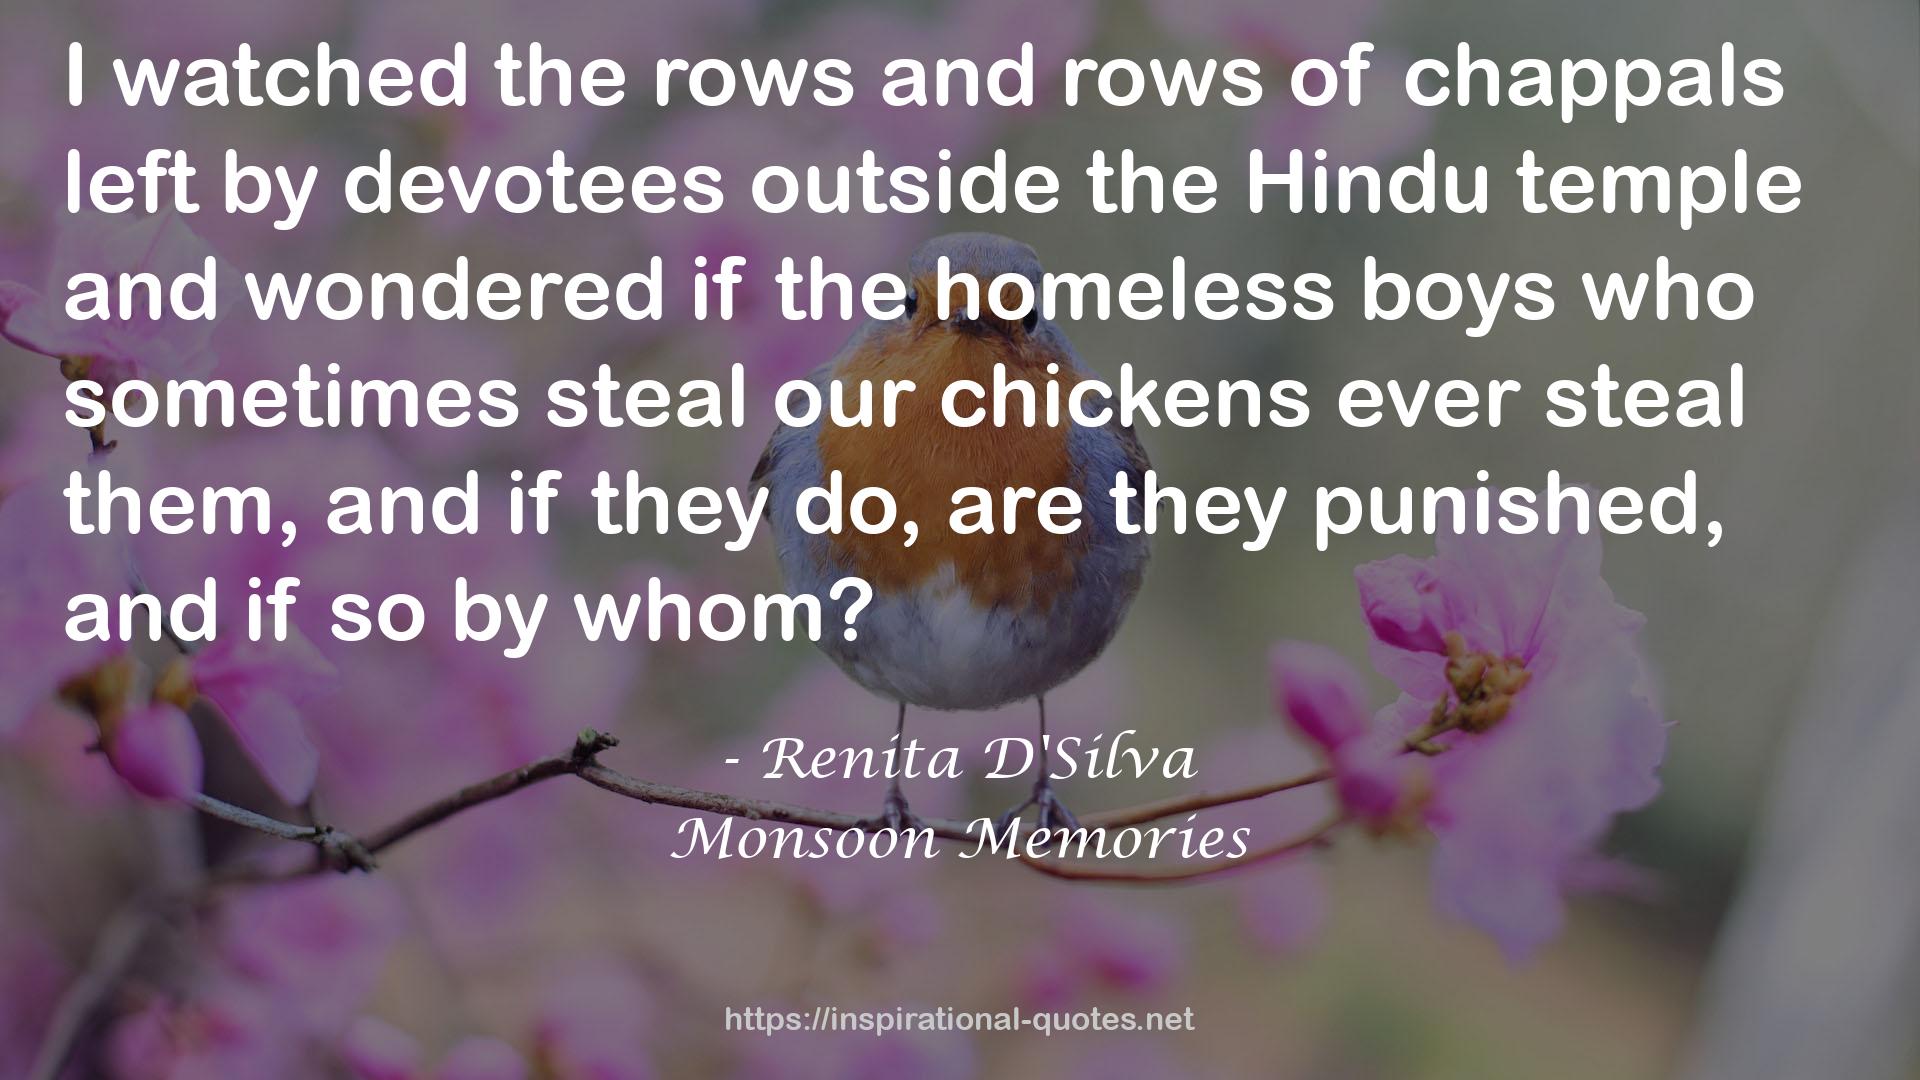 the Hindu temple  QUOTES